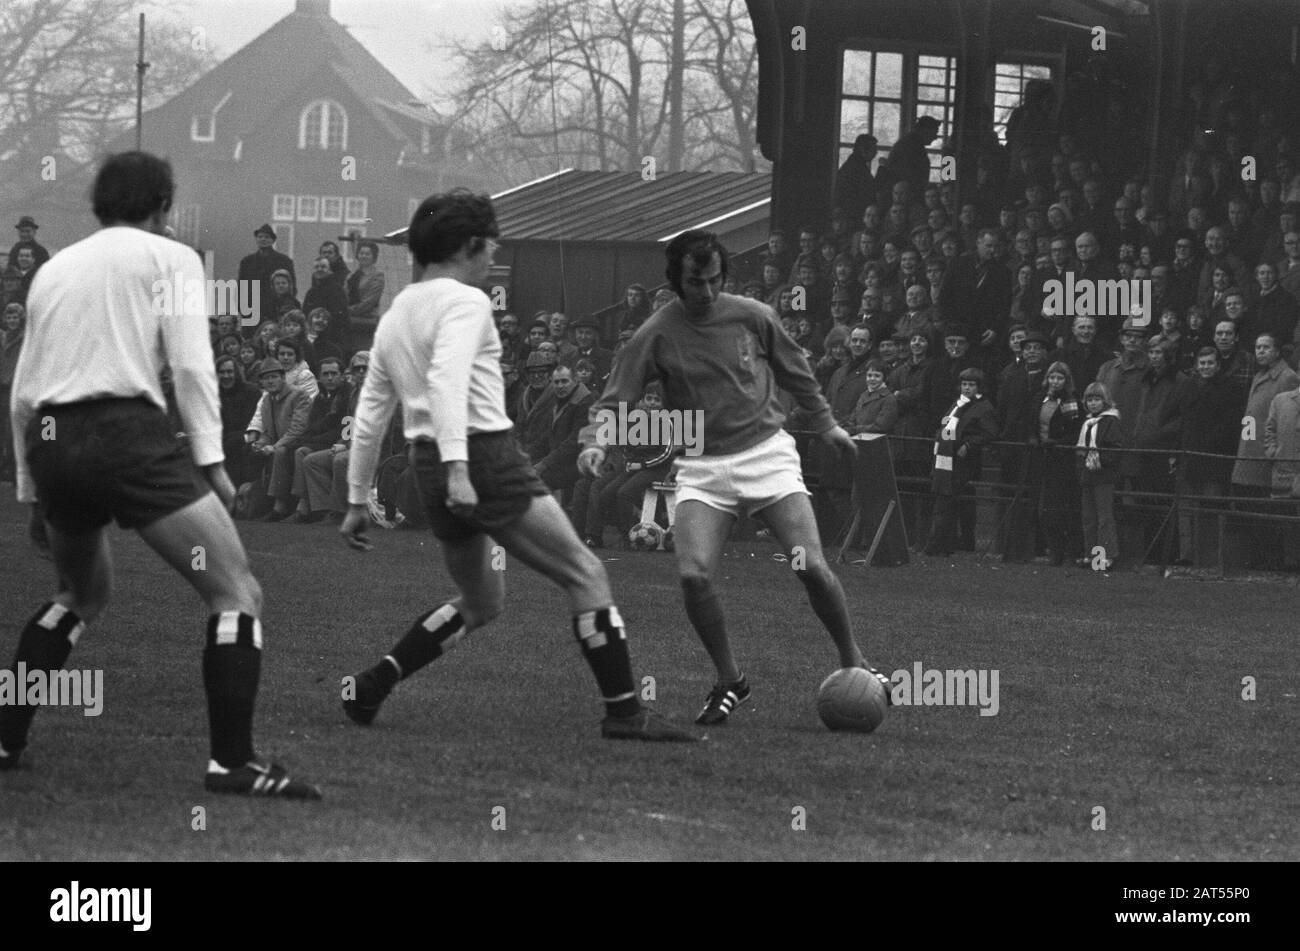 KHFC against Old Internationals, number 3 and 5 Coen Moulijn in action Date: January 1, 1973 Location: Haarlem Keywords: sport, football Personname: Moulijn, Coen Stock Photo